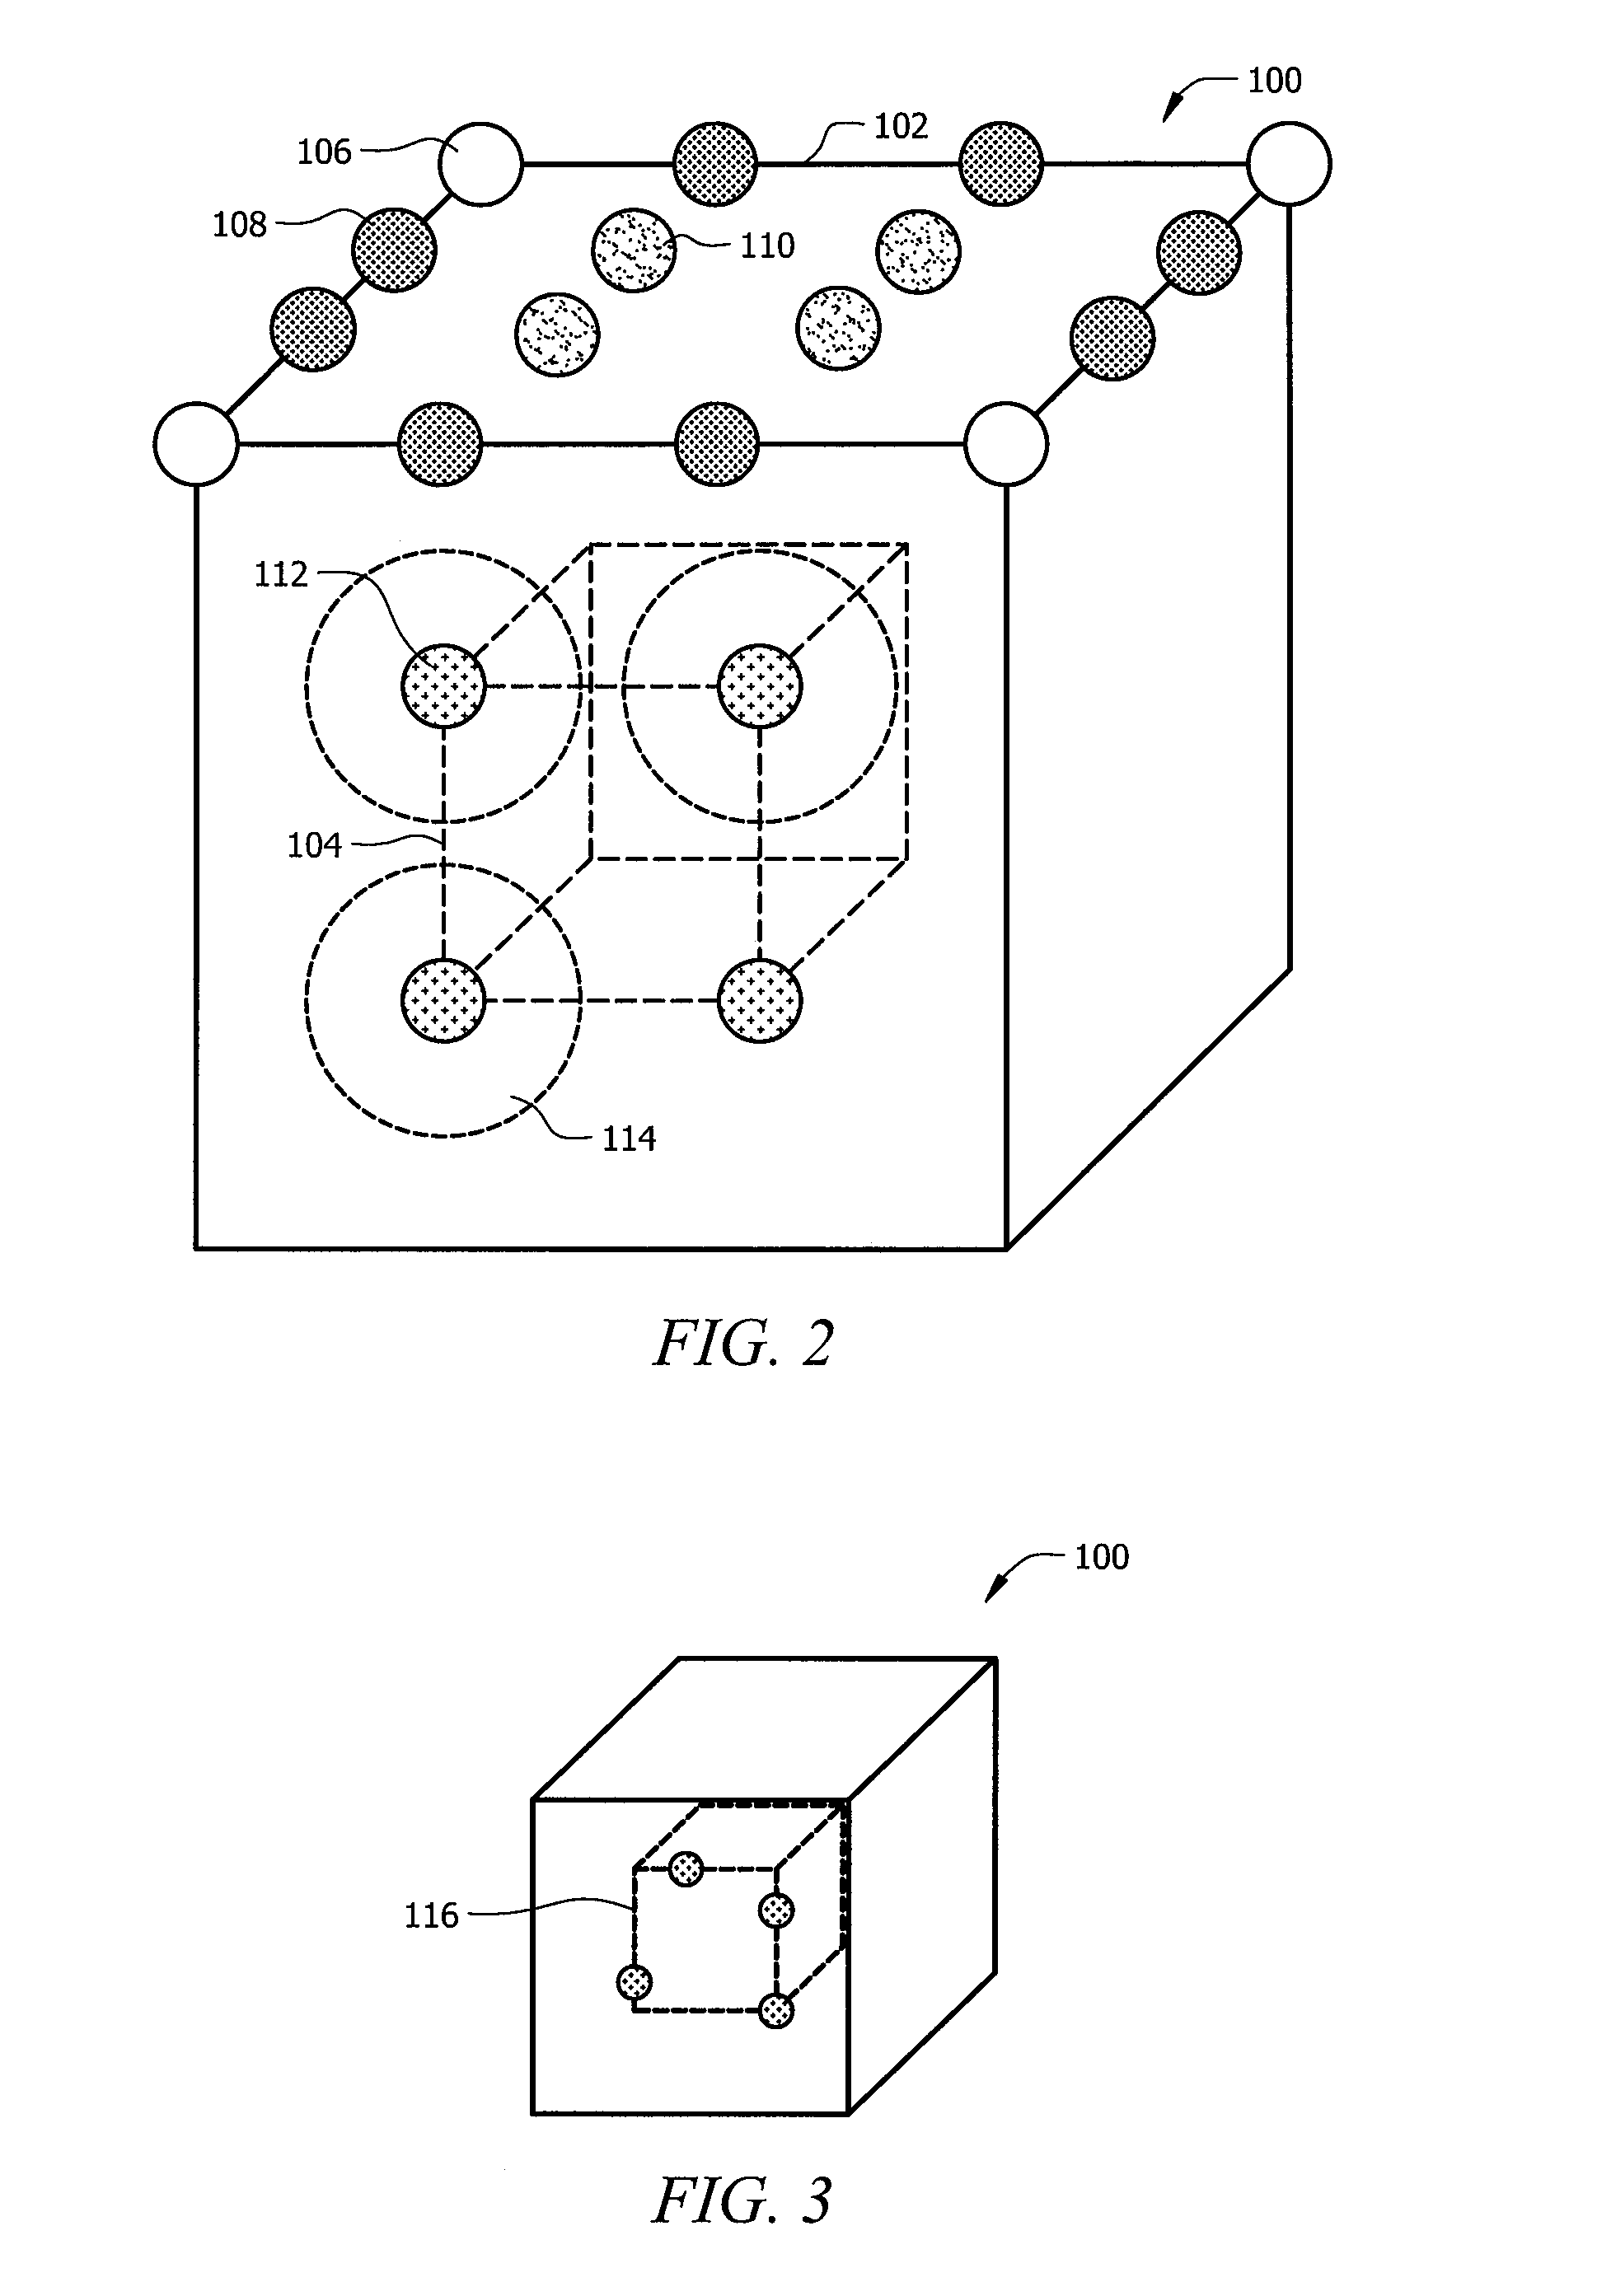 Controlled randomized porous structures and methods for making same